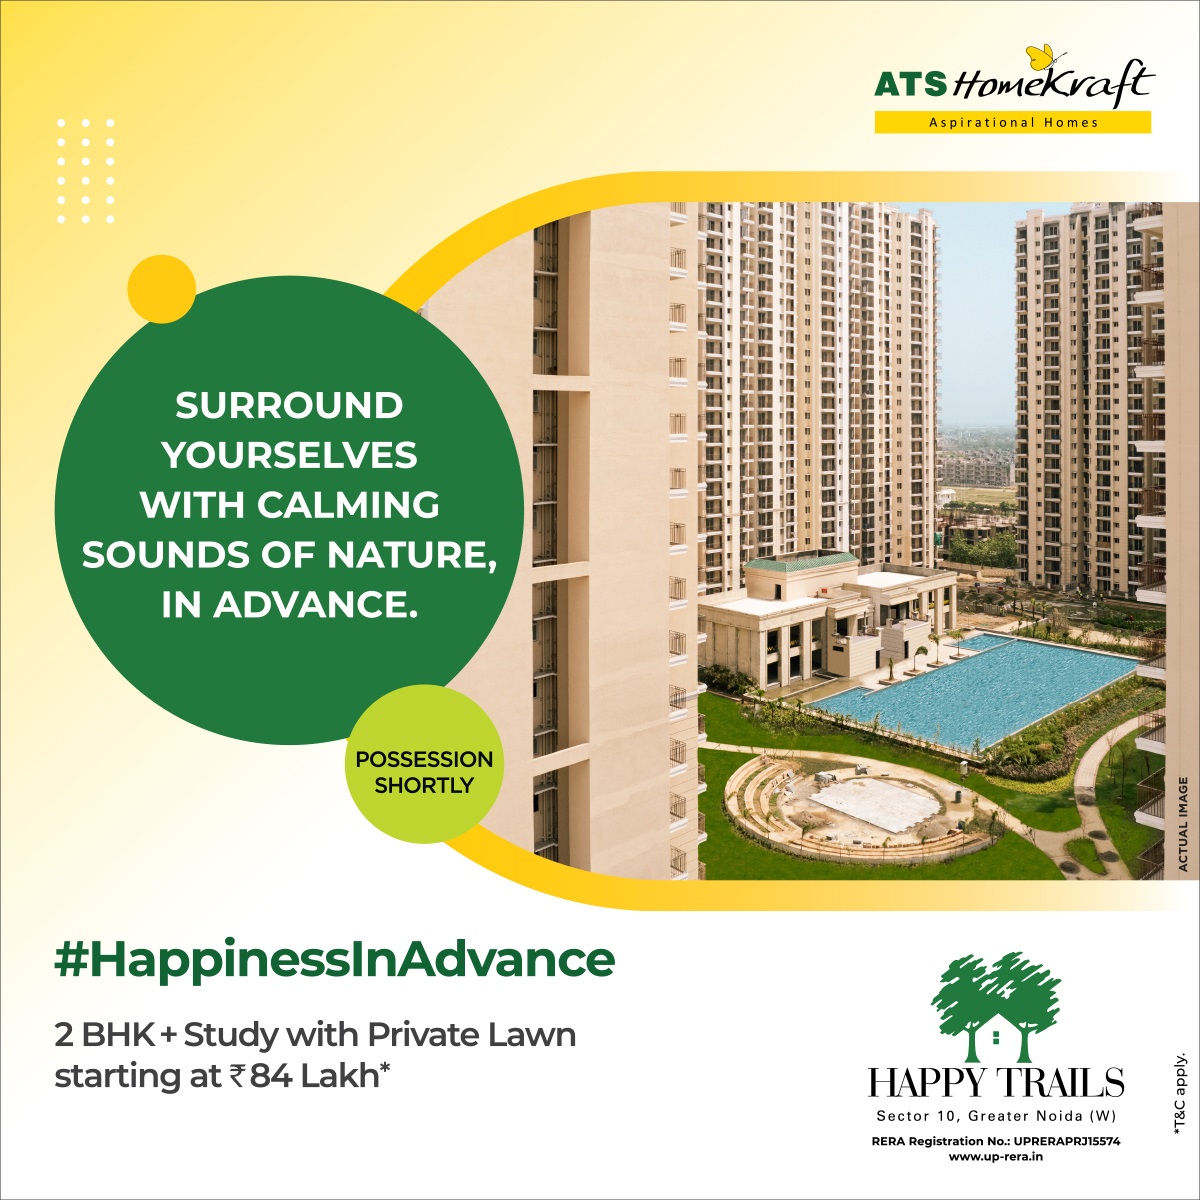 Book 2.5 BHK with private lawn starting Rs 84 Lac onwards at ATS HomeKraft Happy Trails in Greater Noida Update